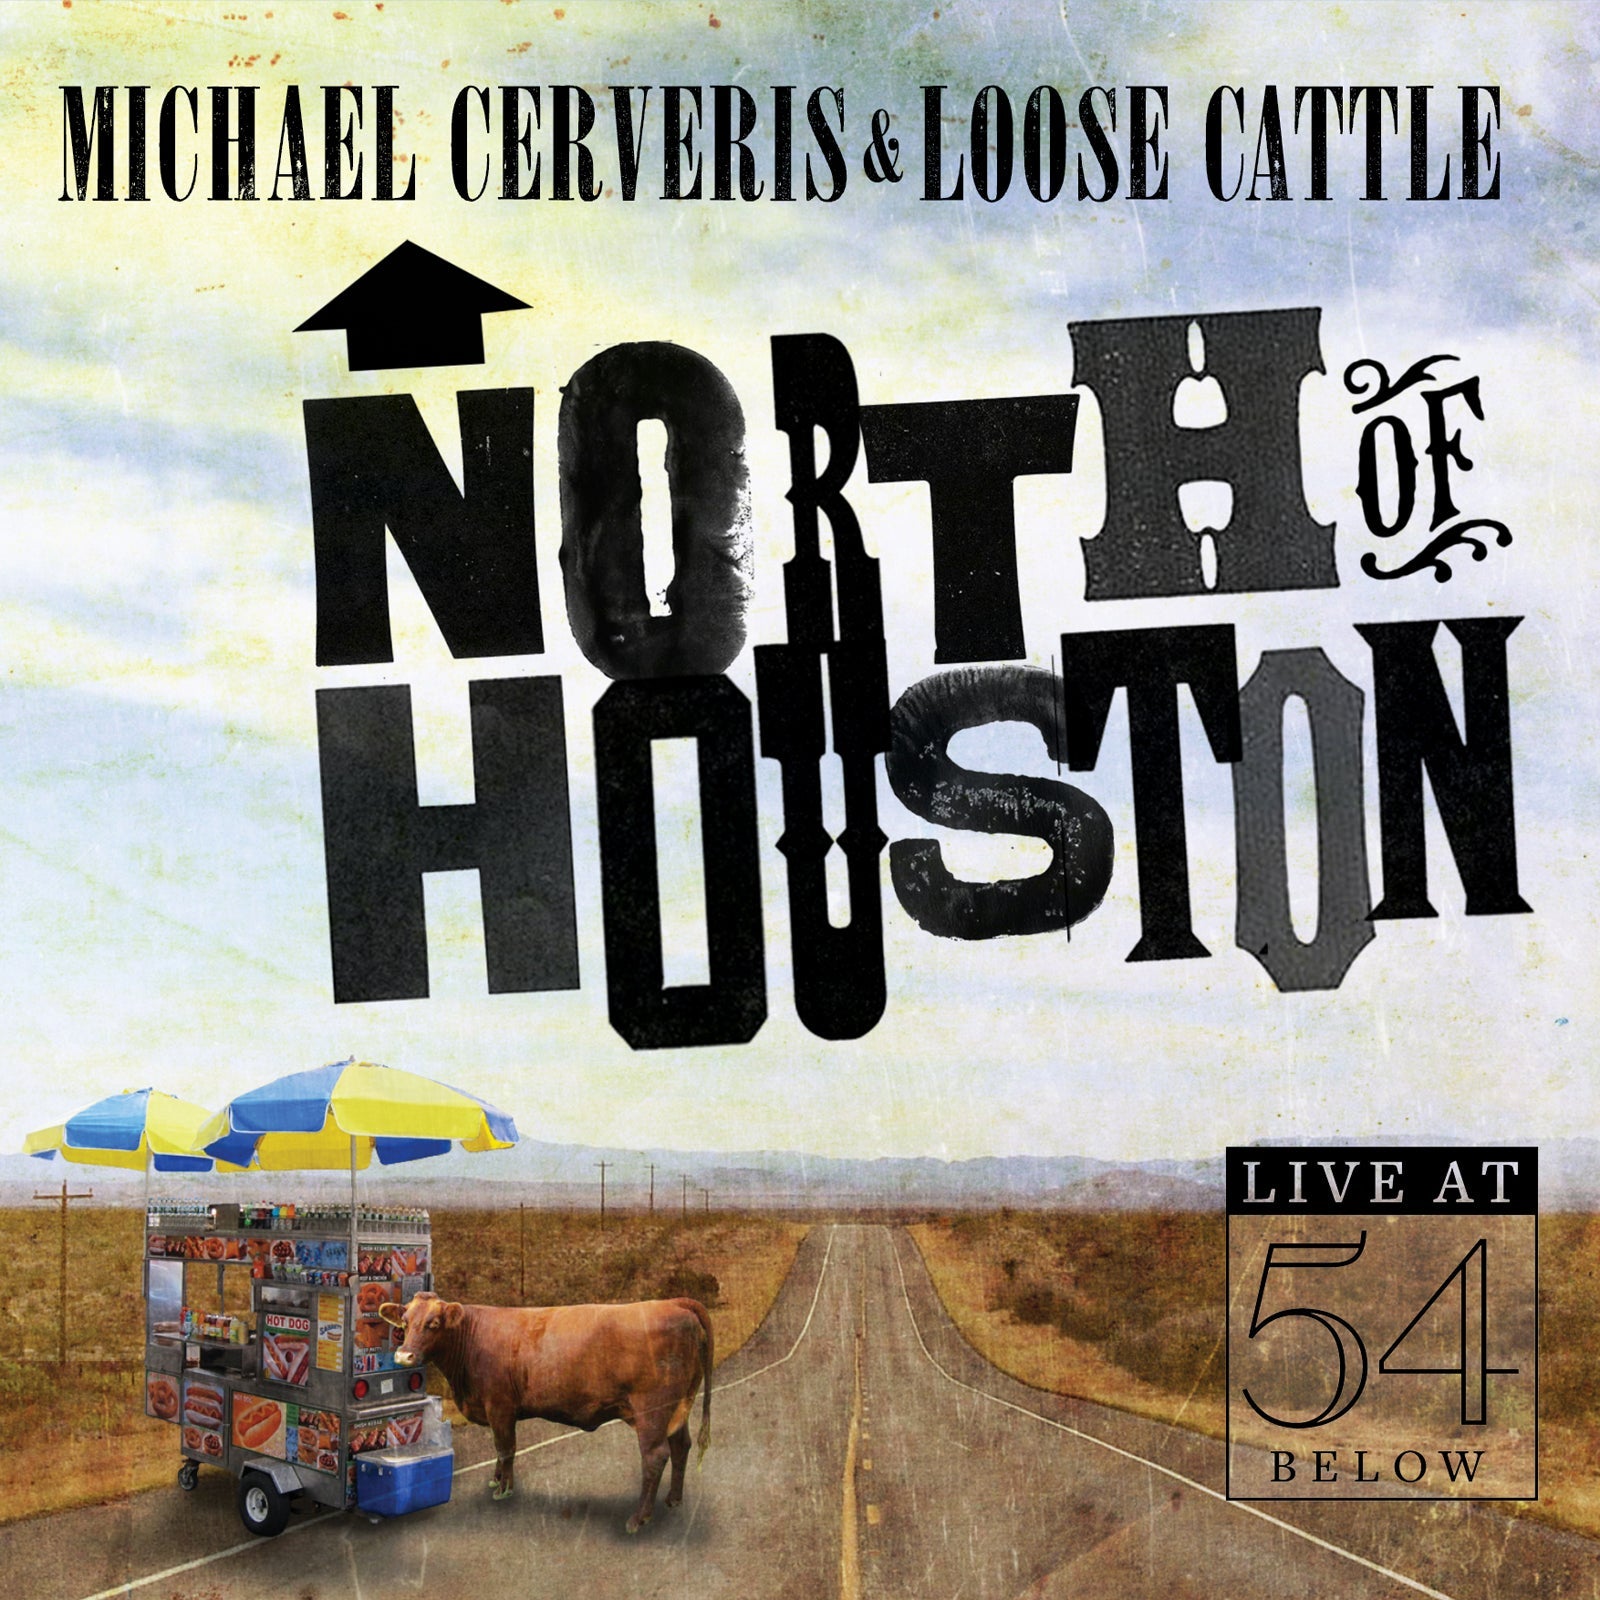 Michael Cerveris & Loose Cattle: North of Houston - Live at 54 Below [MP3]